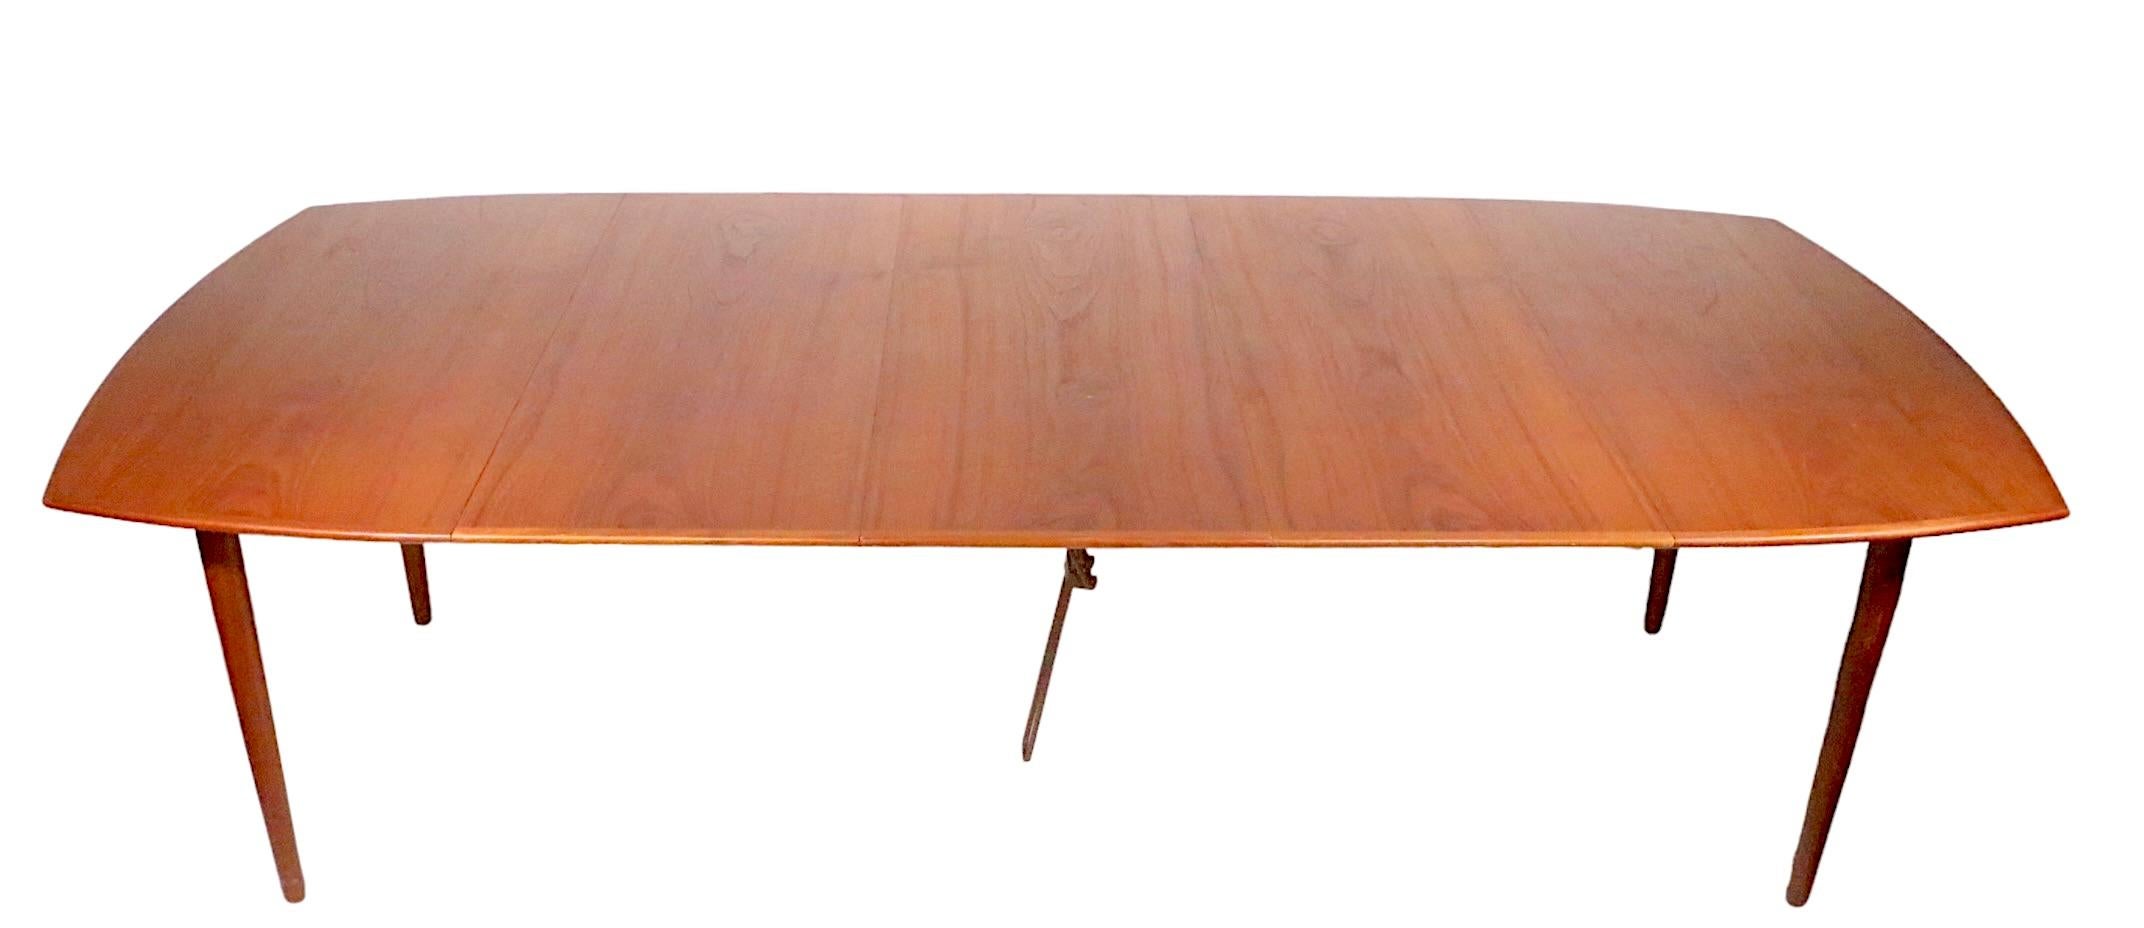 Danish Mid Century Modern Teak Extension  Dining Table by H W Klein  c 1950's For Sale 7